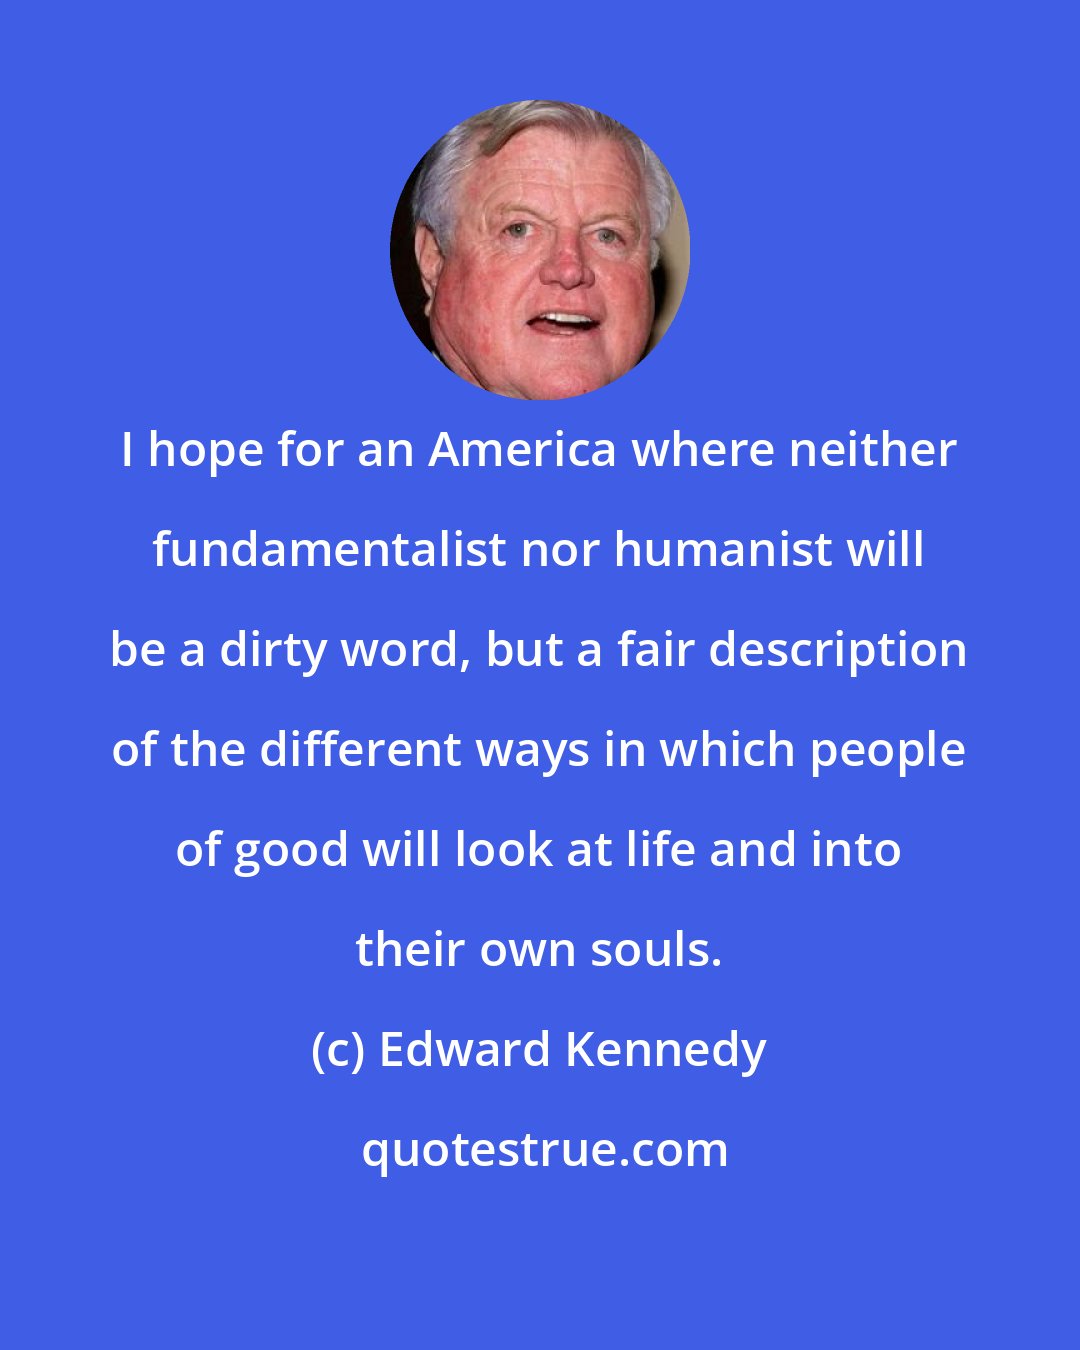 Edward Kennedy: I hope for an America where neither fundamentalist nor humanist will be a dirty word, but a fair description of the different ways in which people of good will look at life and into their own souls.